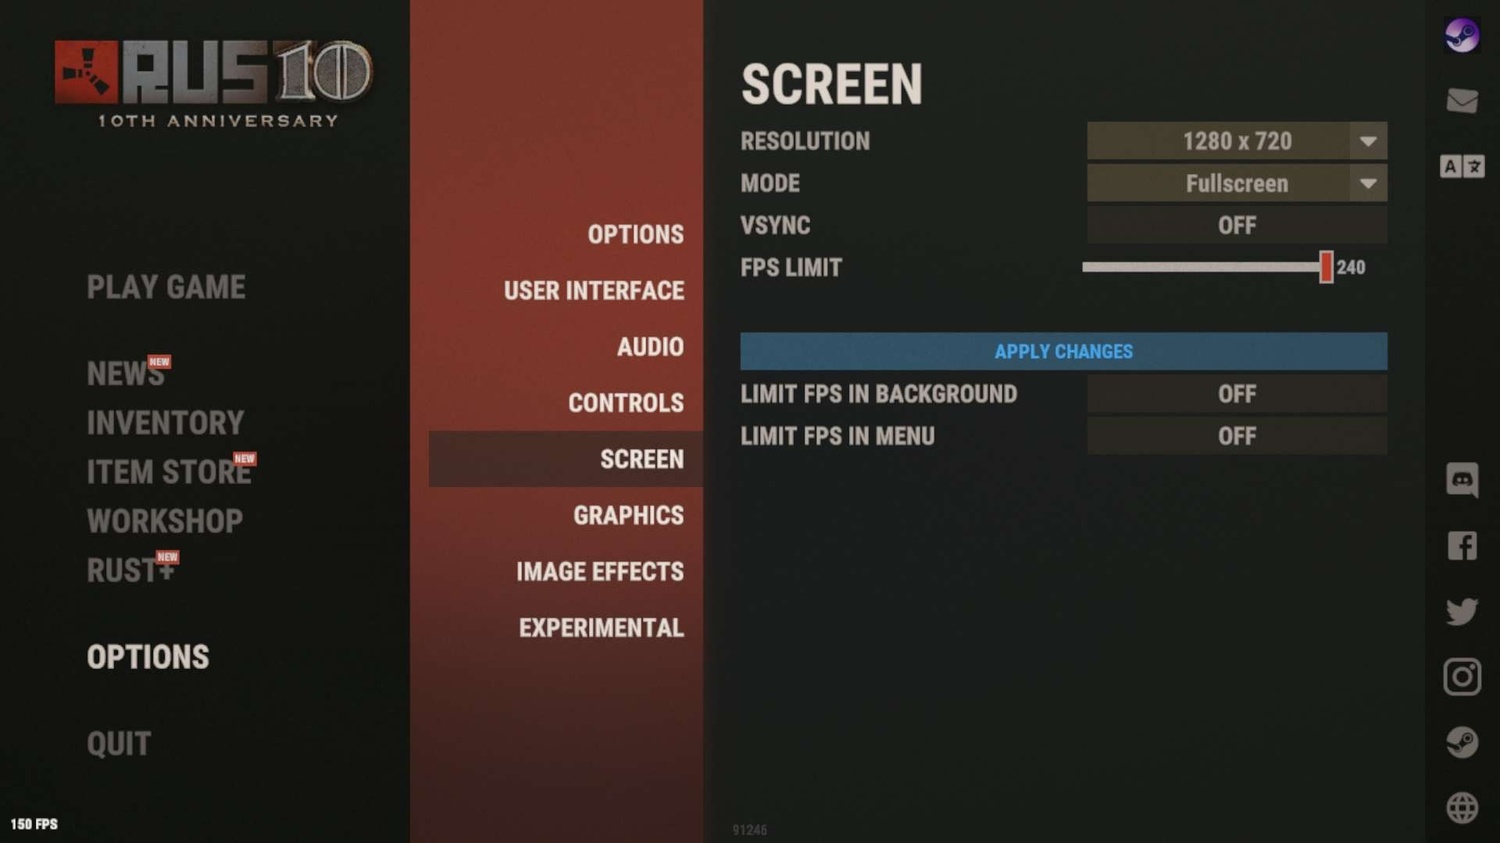 A screenshot showing a glimpse of the settings menu in Rust, featuring the different settings for your screen.